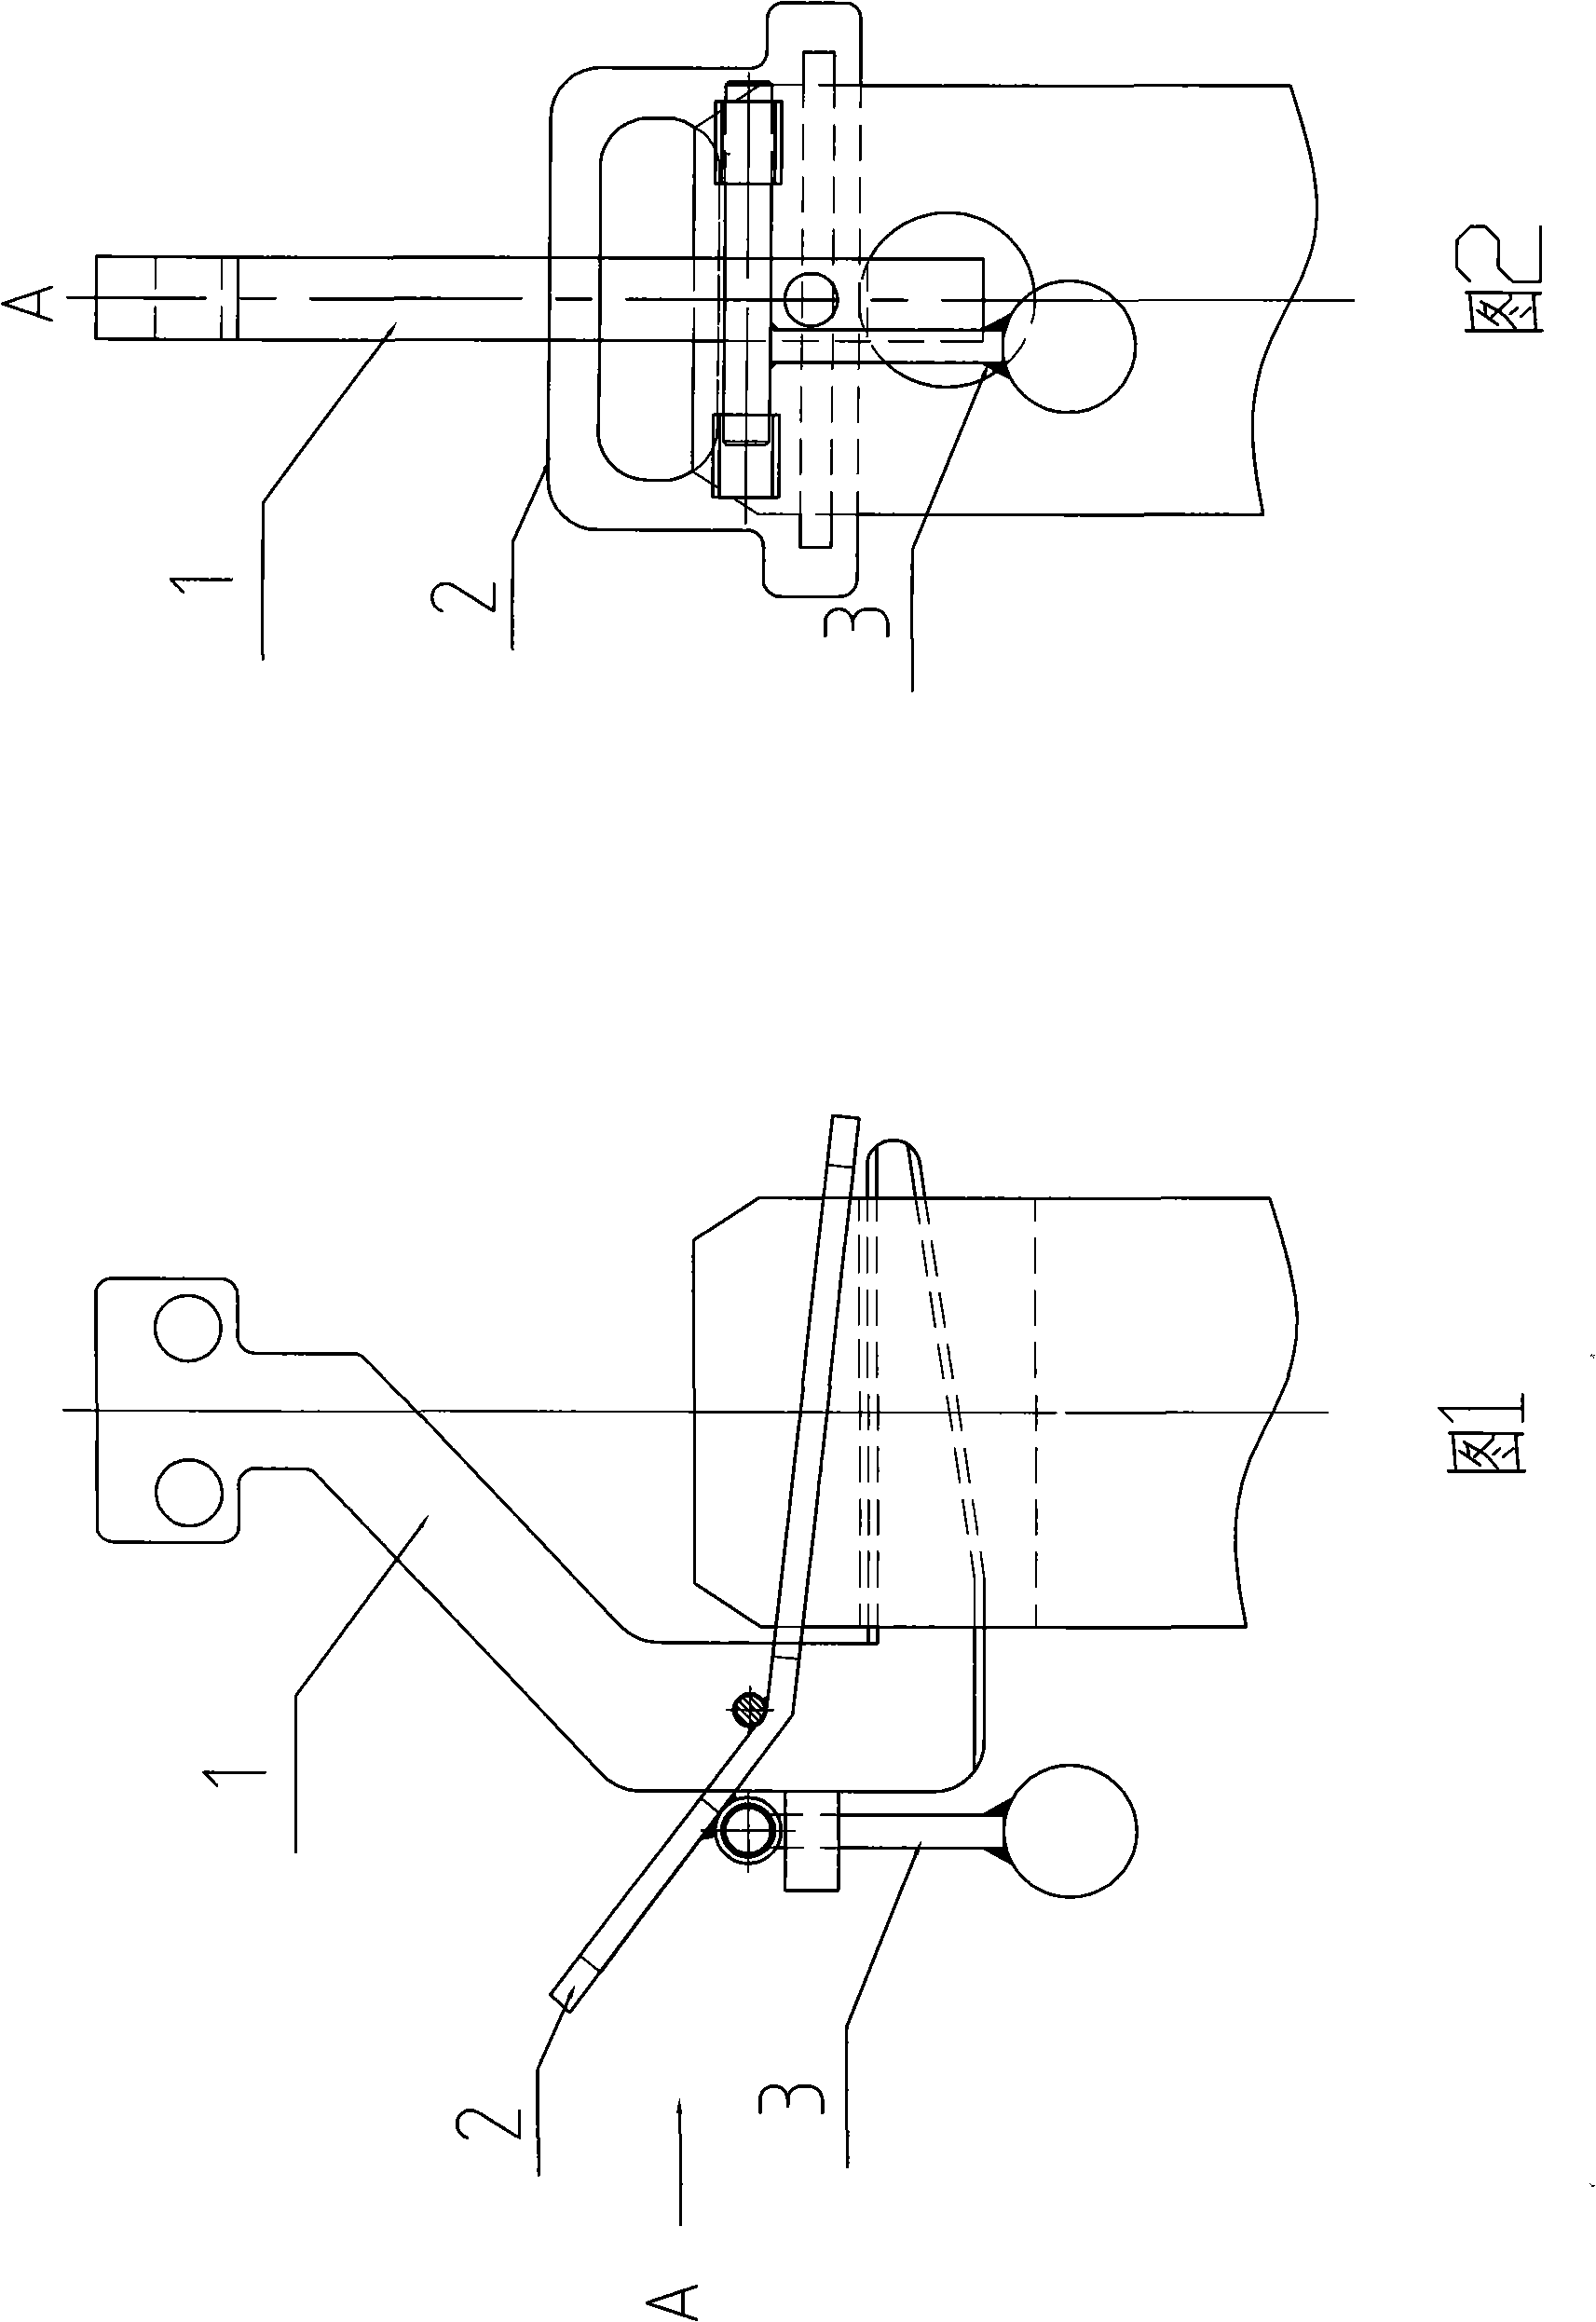 Connecting apparatus for catenary and aluminum guide stem